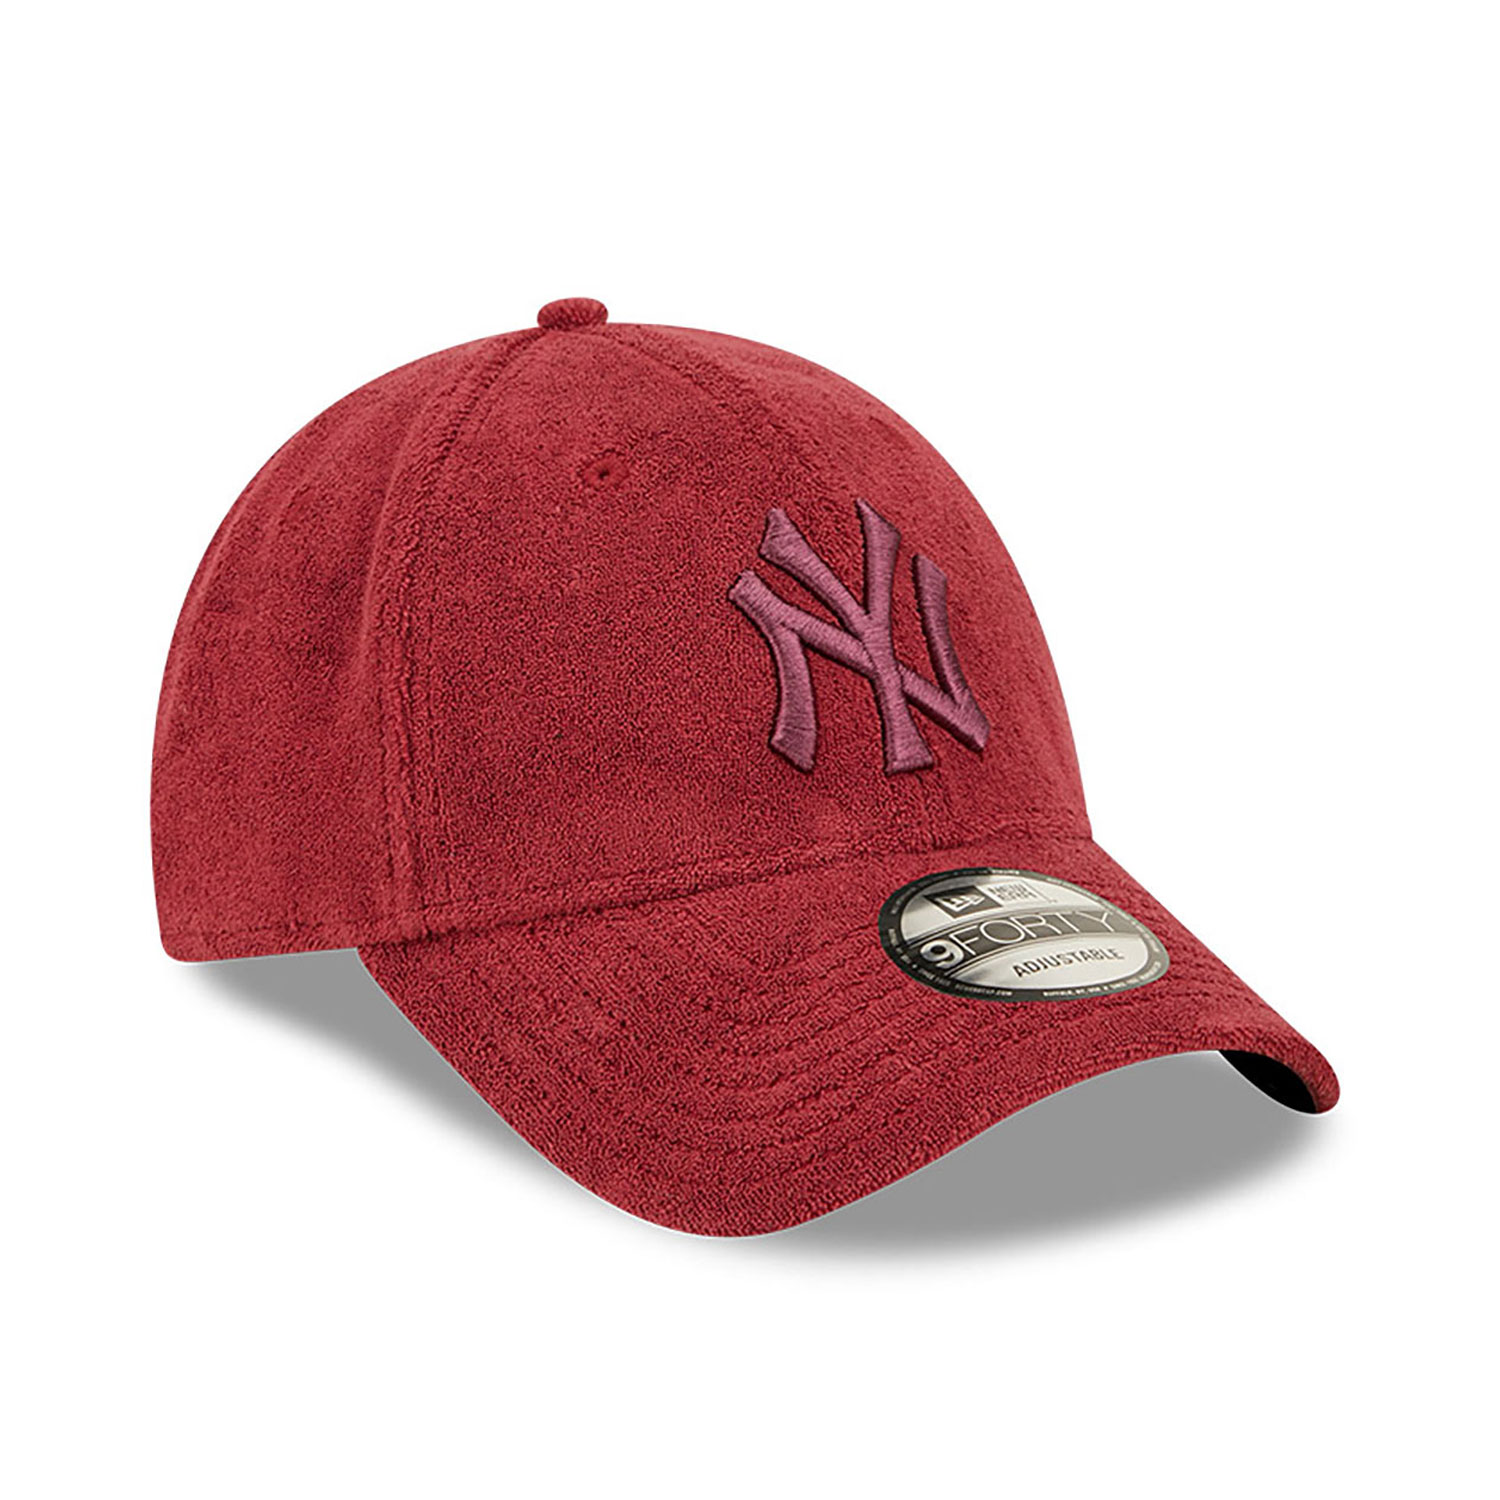 New York Yankees Towelling Red 9FORTY Adjustable Cap